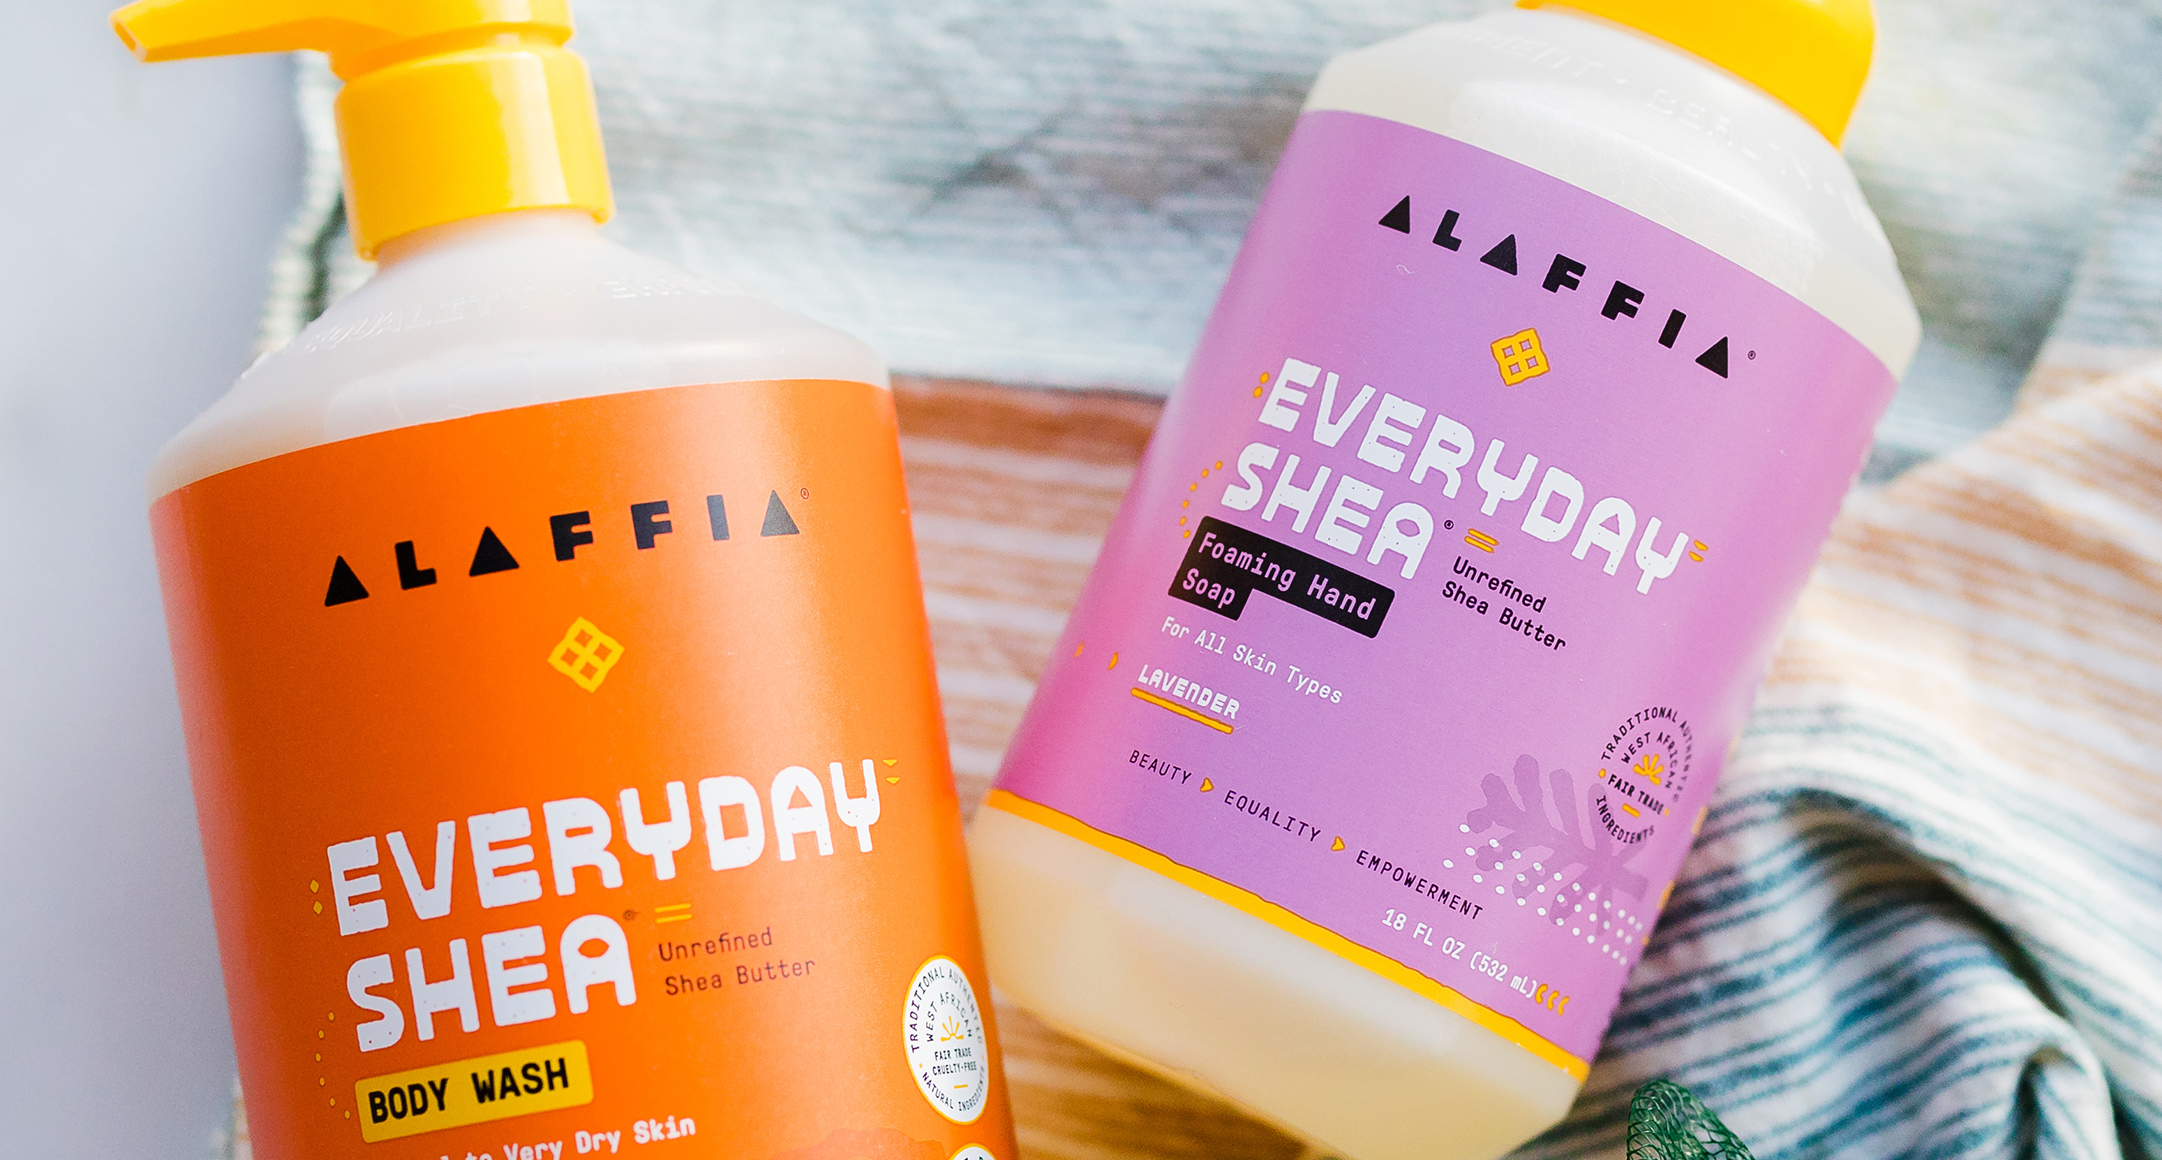 Two bottles of Alaffia Everyday Shea Foaming Hand Soap and Body Wash. 